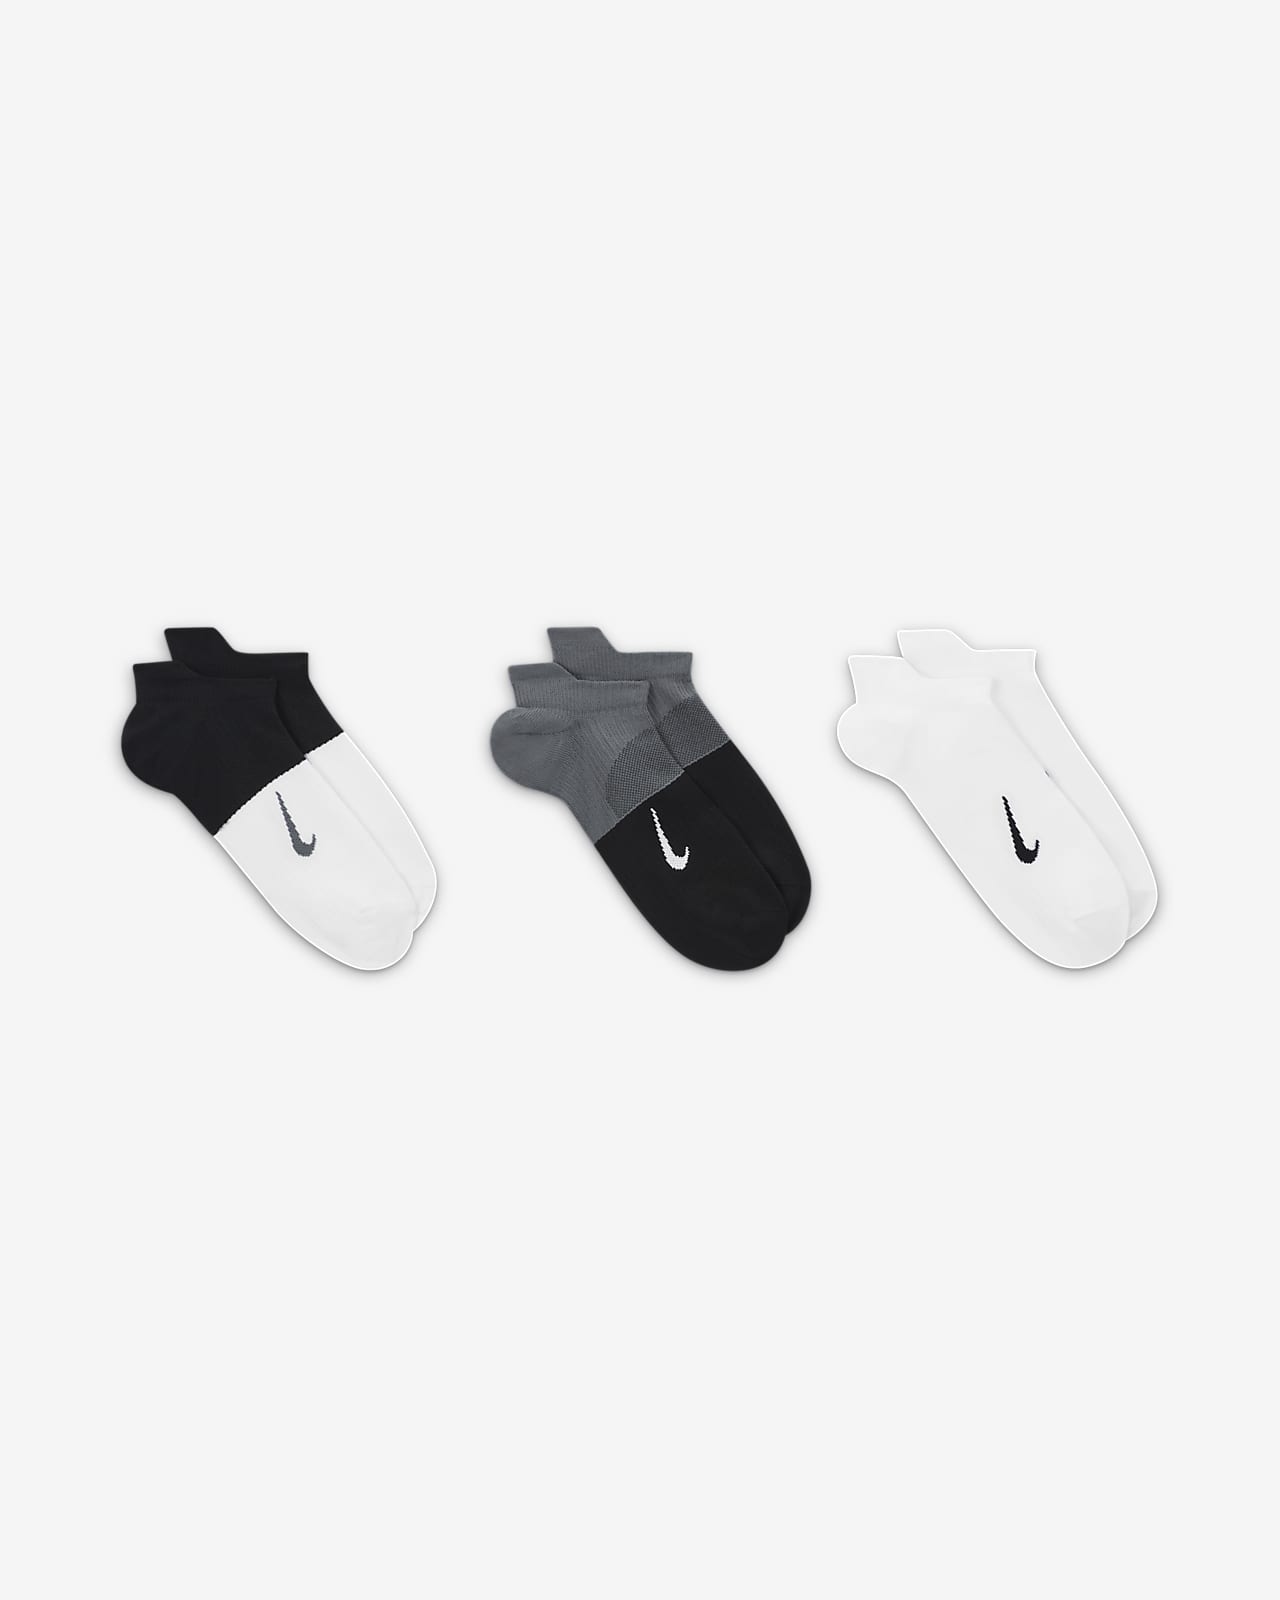 Chaussettes Nike everyday lightweight